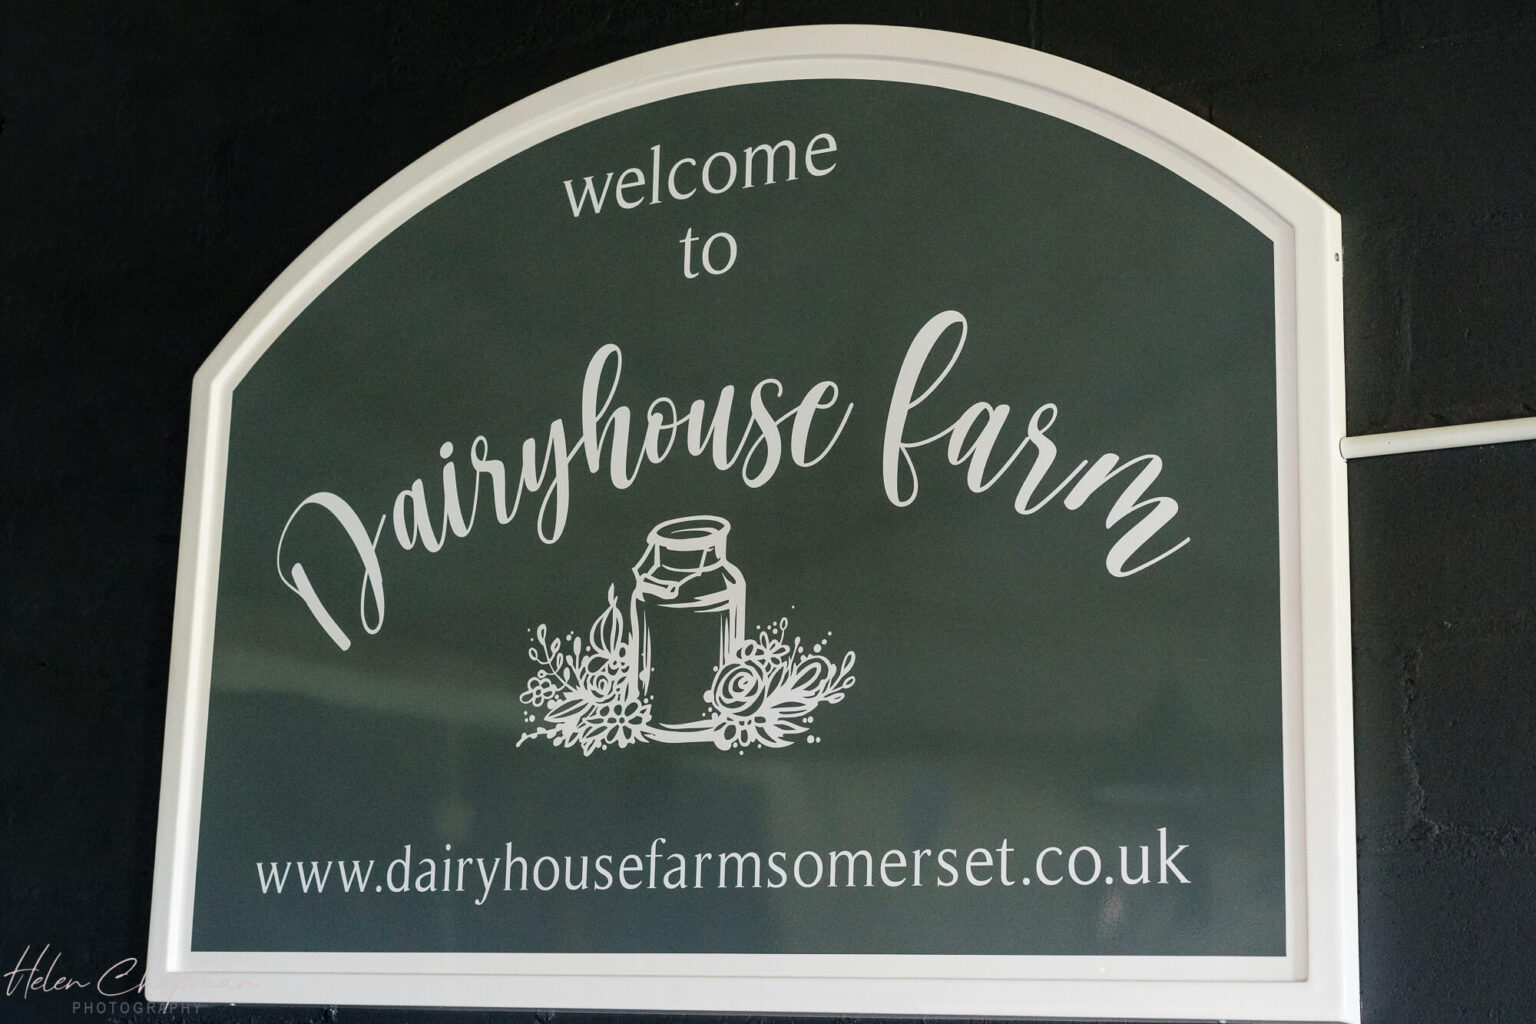 A sign reading "welcome to dairyhouse farm" above the website address "www.dairyhousefarmsomerset.co.uk," elegantly scripted in white on a dark background, with a decorative jar and flowers.